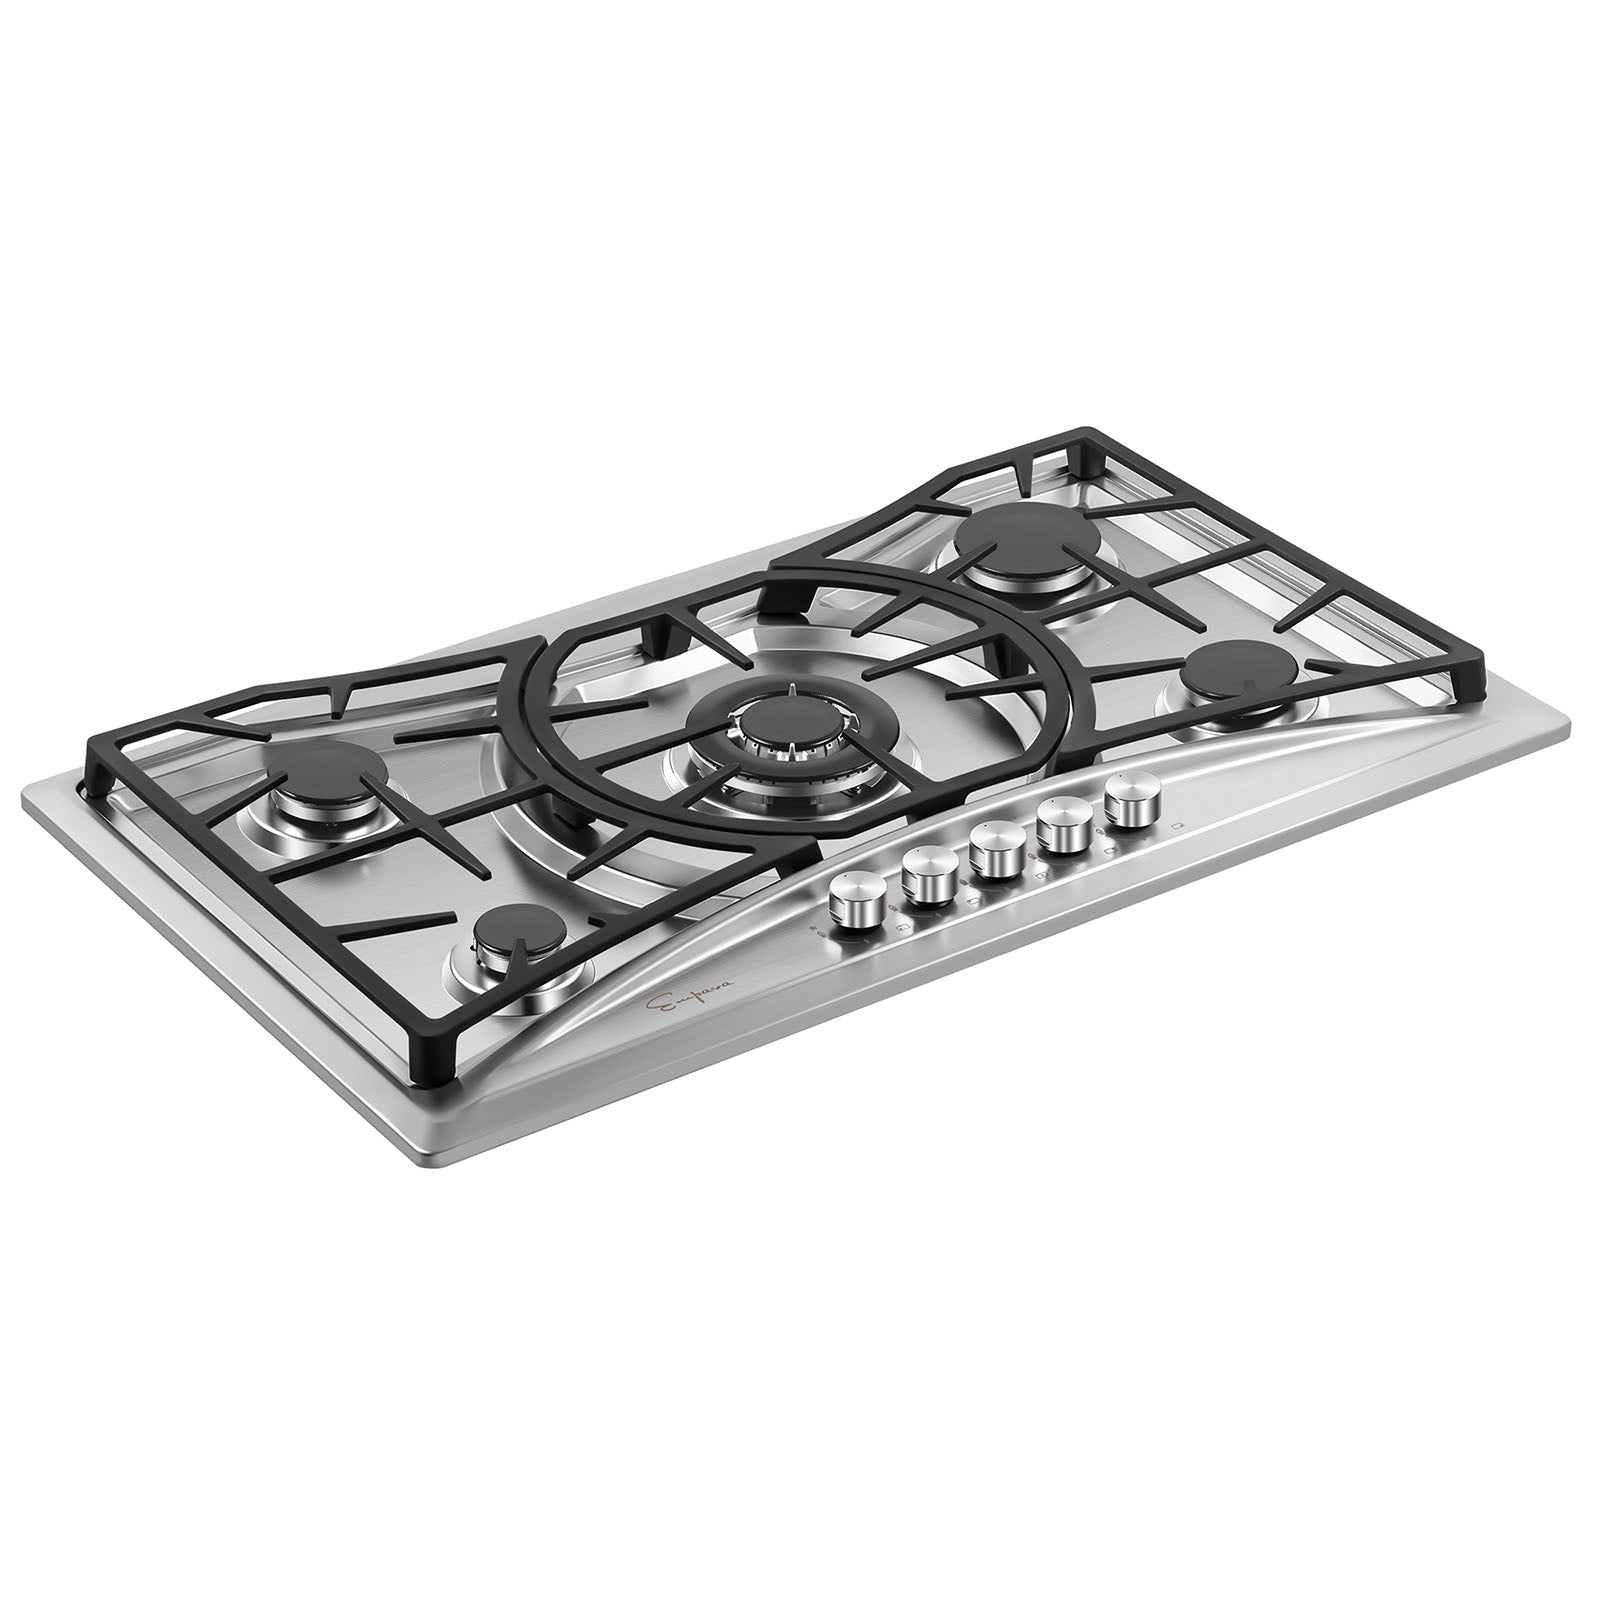 Empava 36 in. Built-In GAS Cooktop in Stainless Steel with 5 Sealed Burners